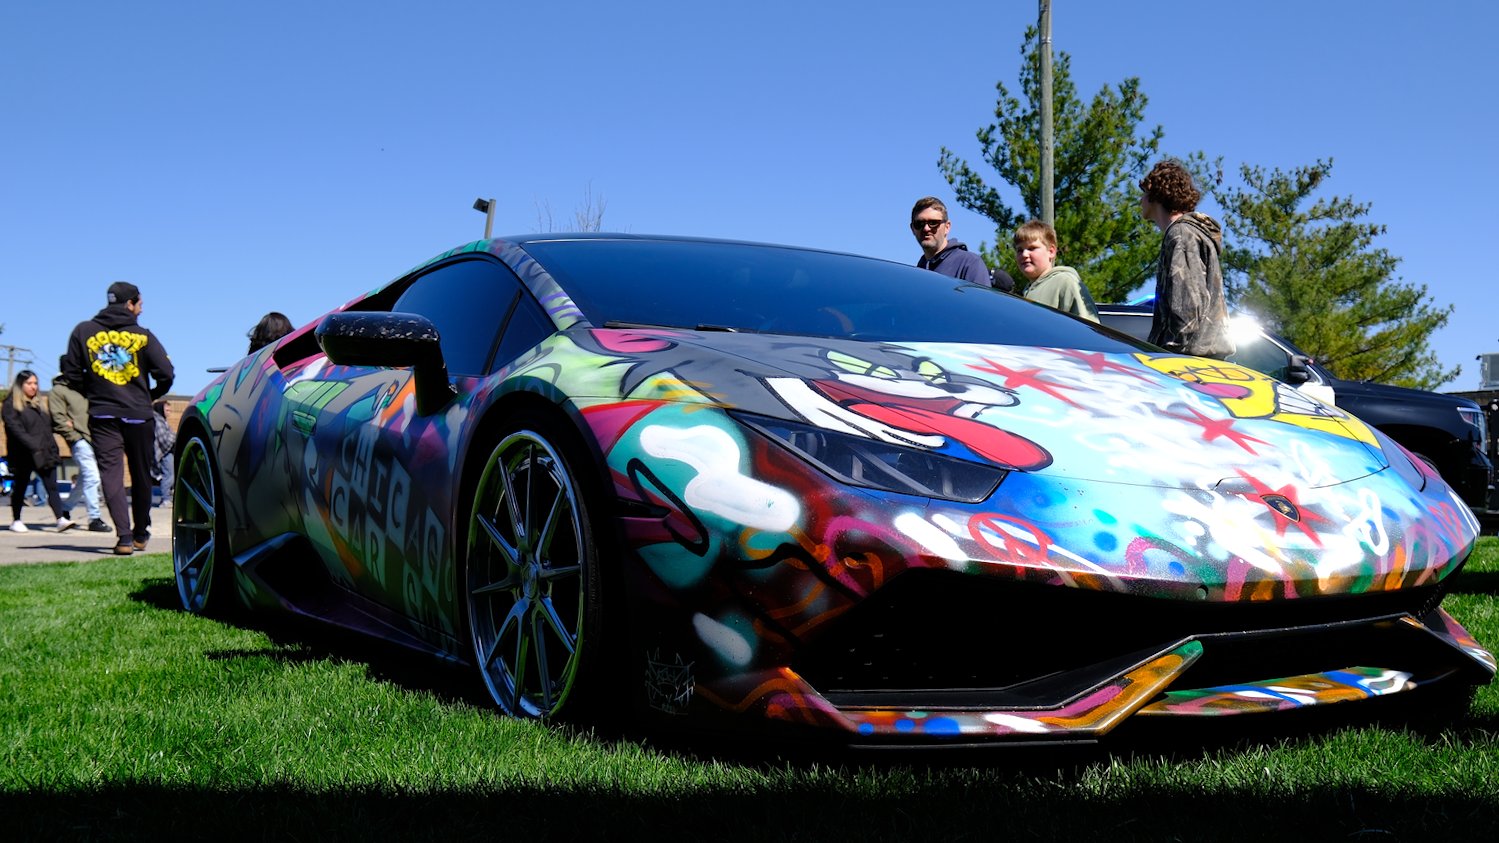 Colorful and artistic Lambo.